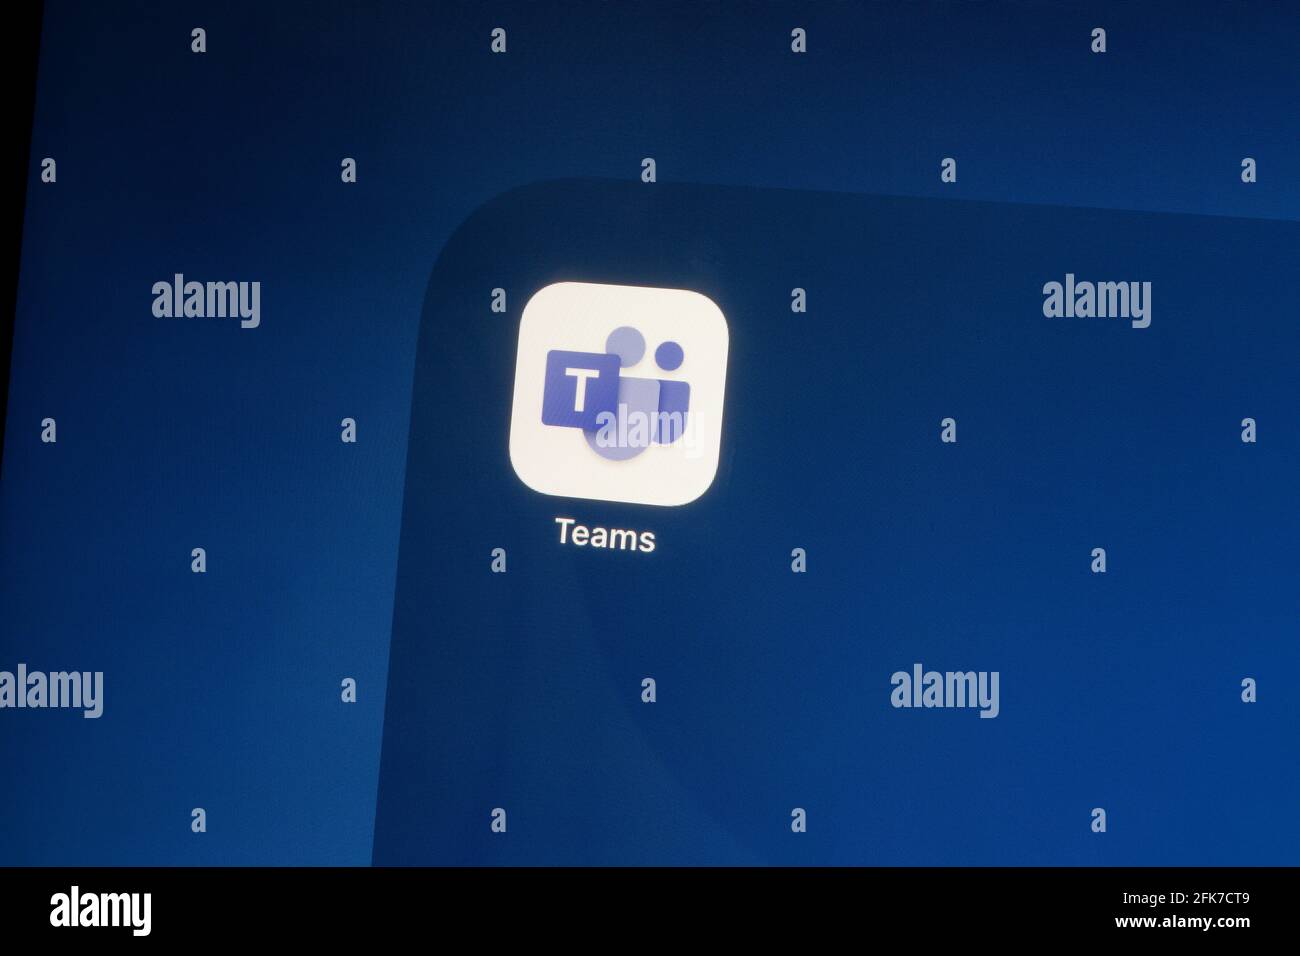 Ostersund, Sweden - Feb 3, 2021: Microsoft Teams app icon. Teams is a unified team communication and collaboration platform with workplace chat. Stock Photo